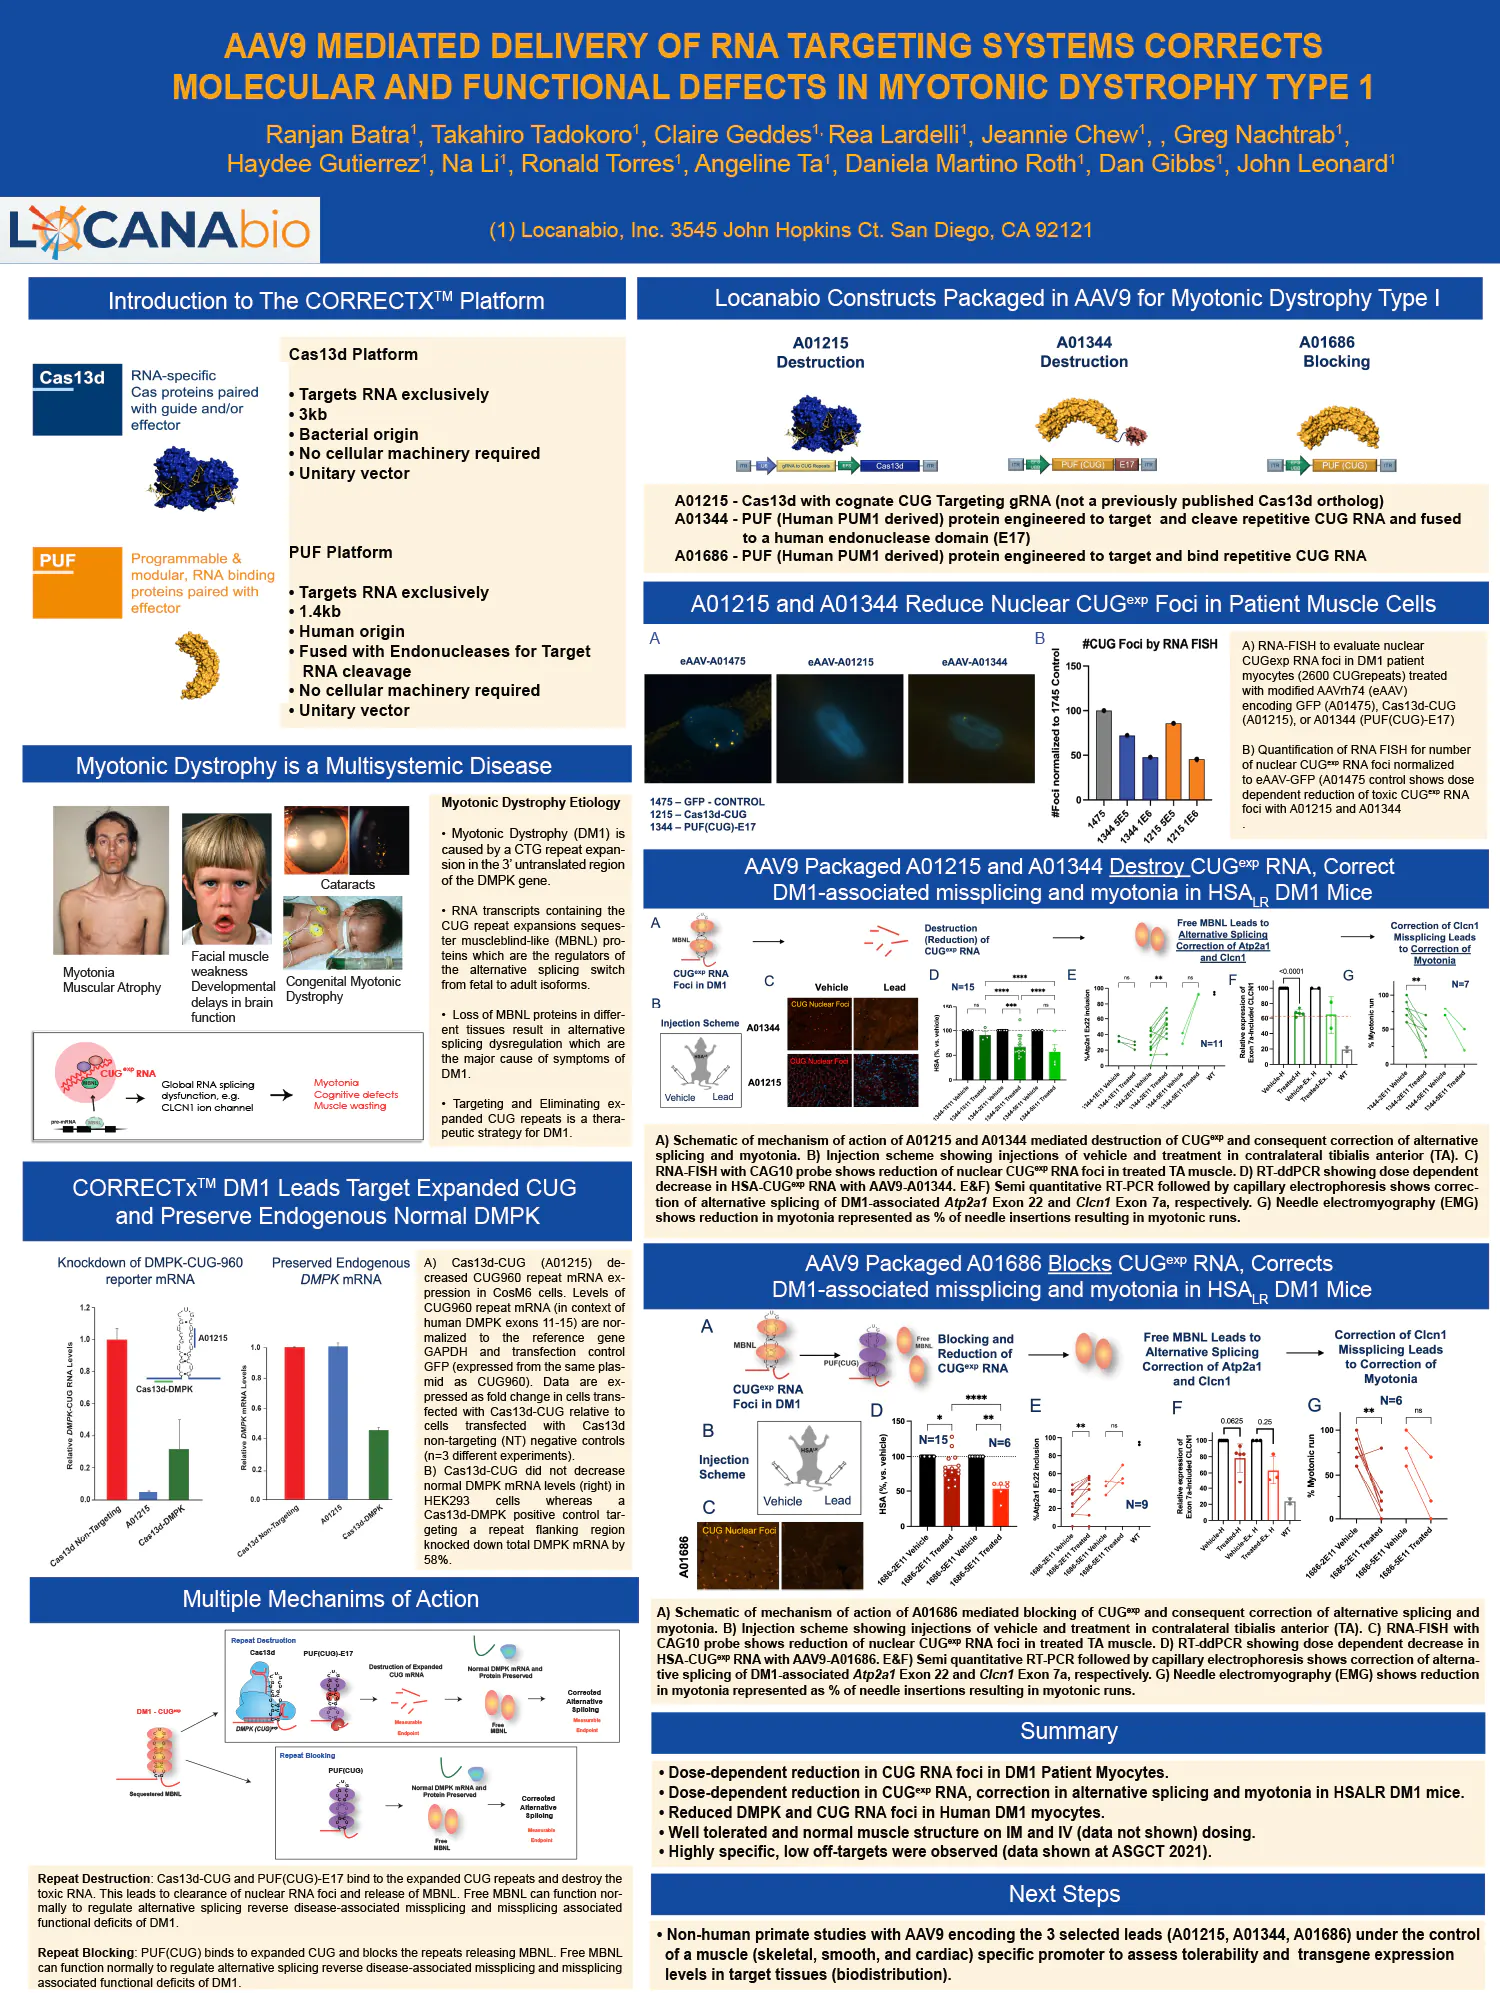 Poster: AAV9 Mediated Delivery of RNA Targeting Systems Corrects Molecular and Functional Defects in Myotonic Dystrophy Type 1